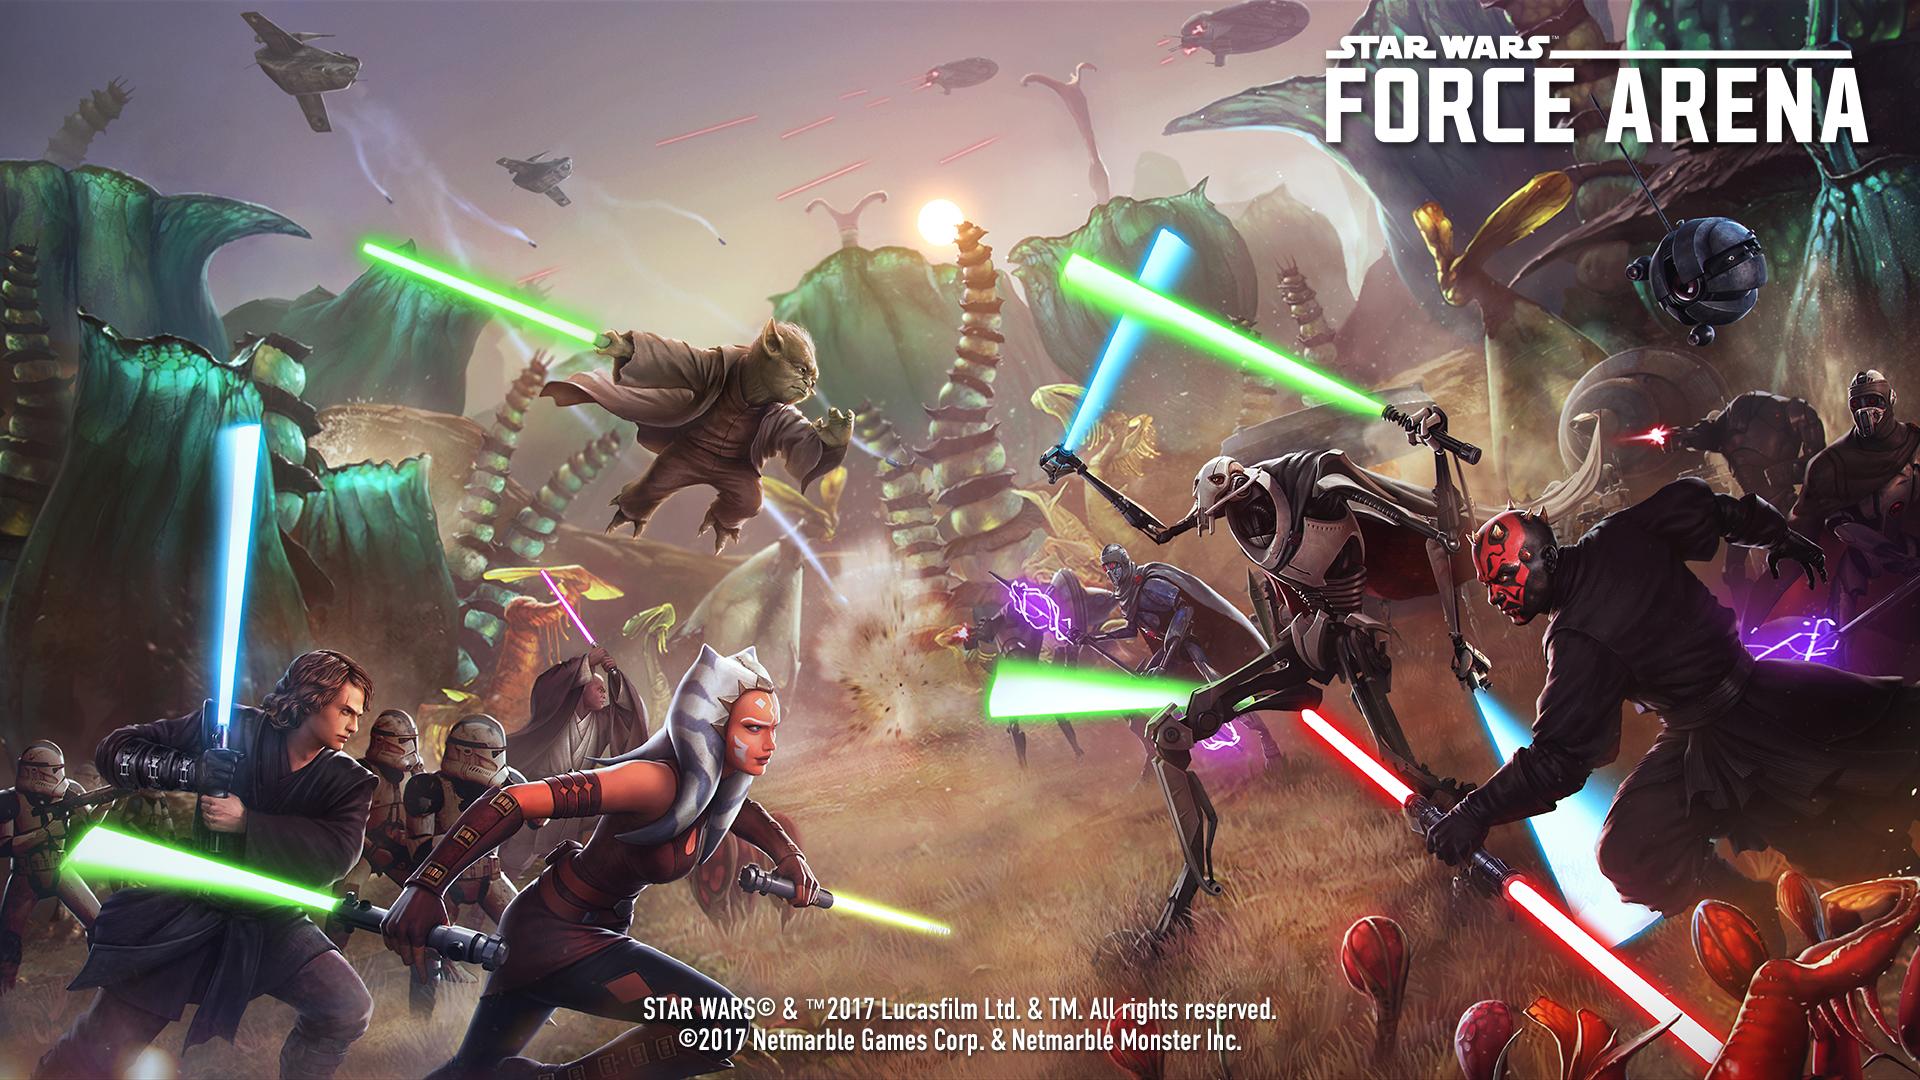 Force arena